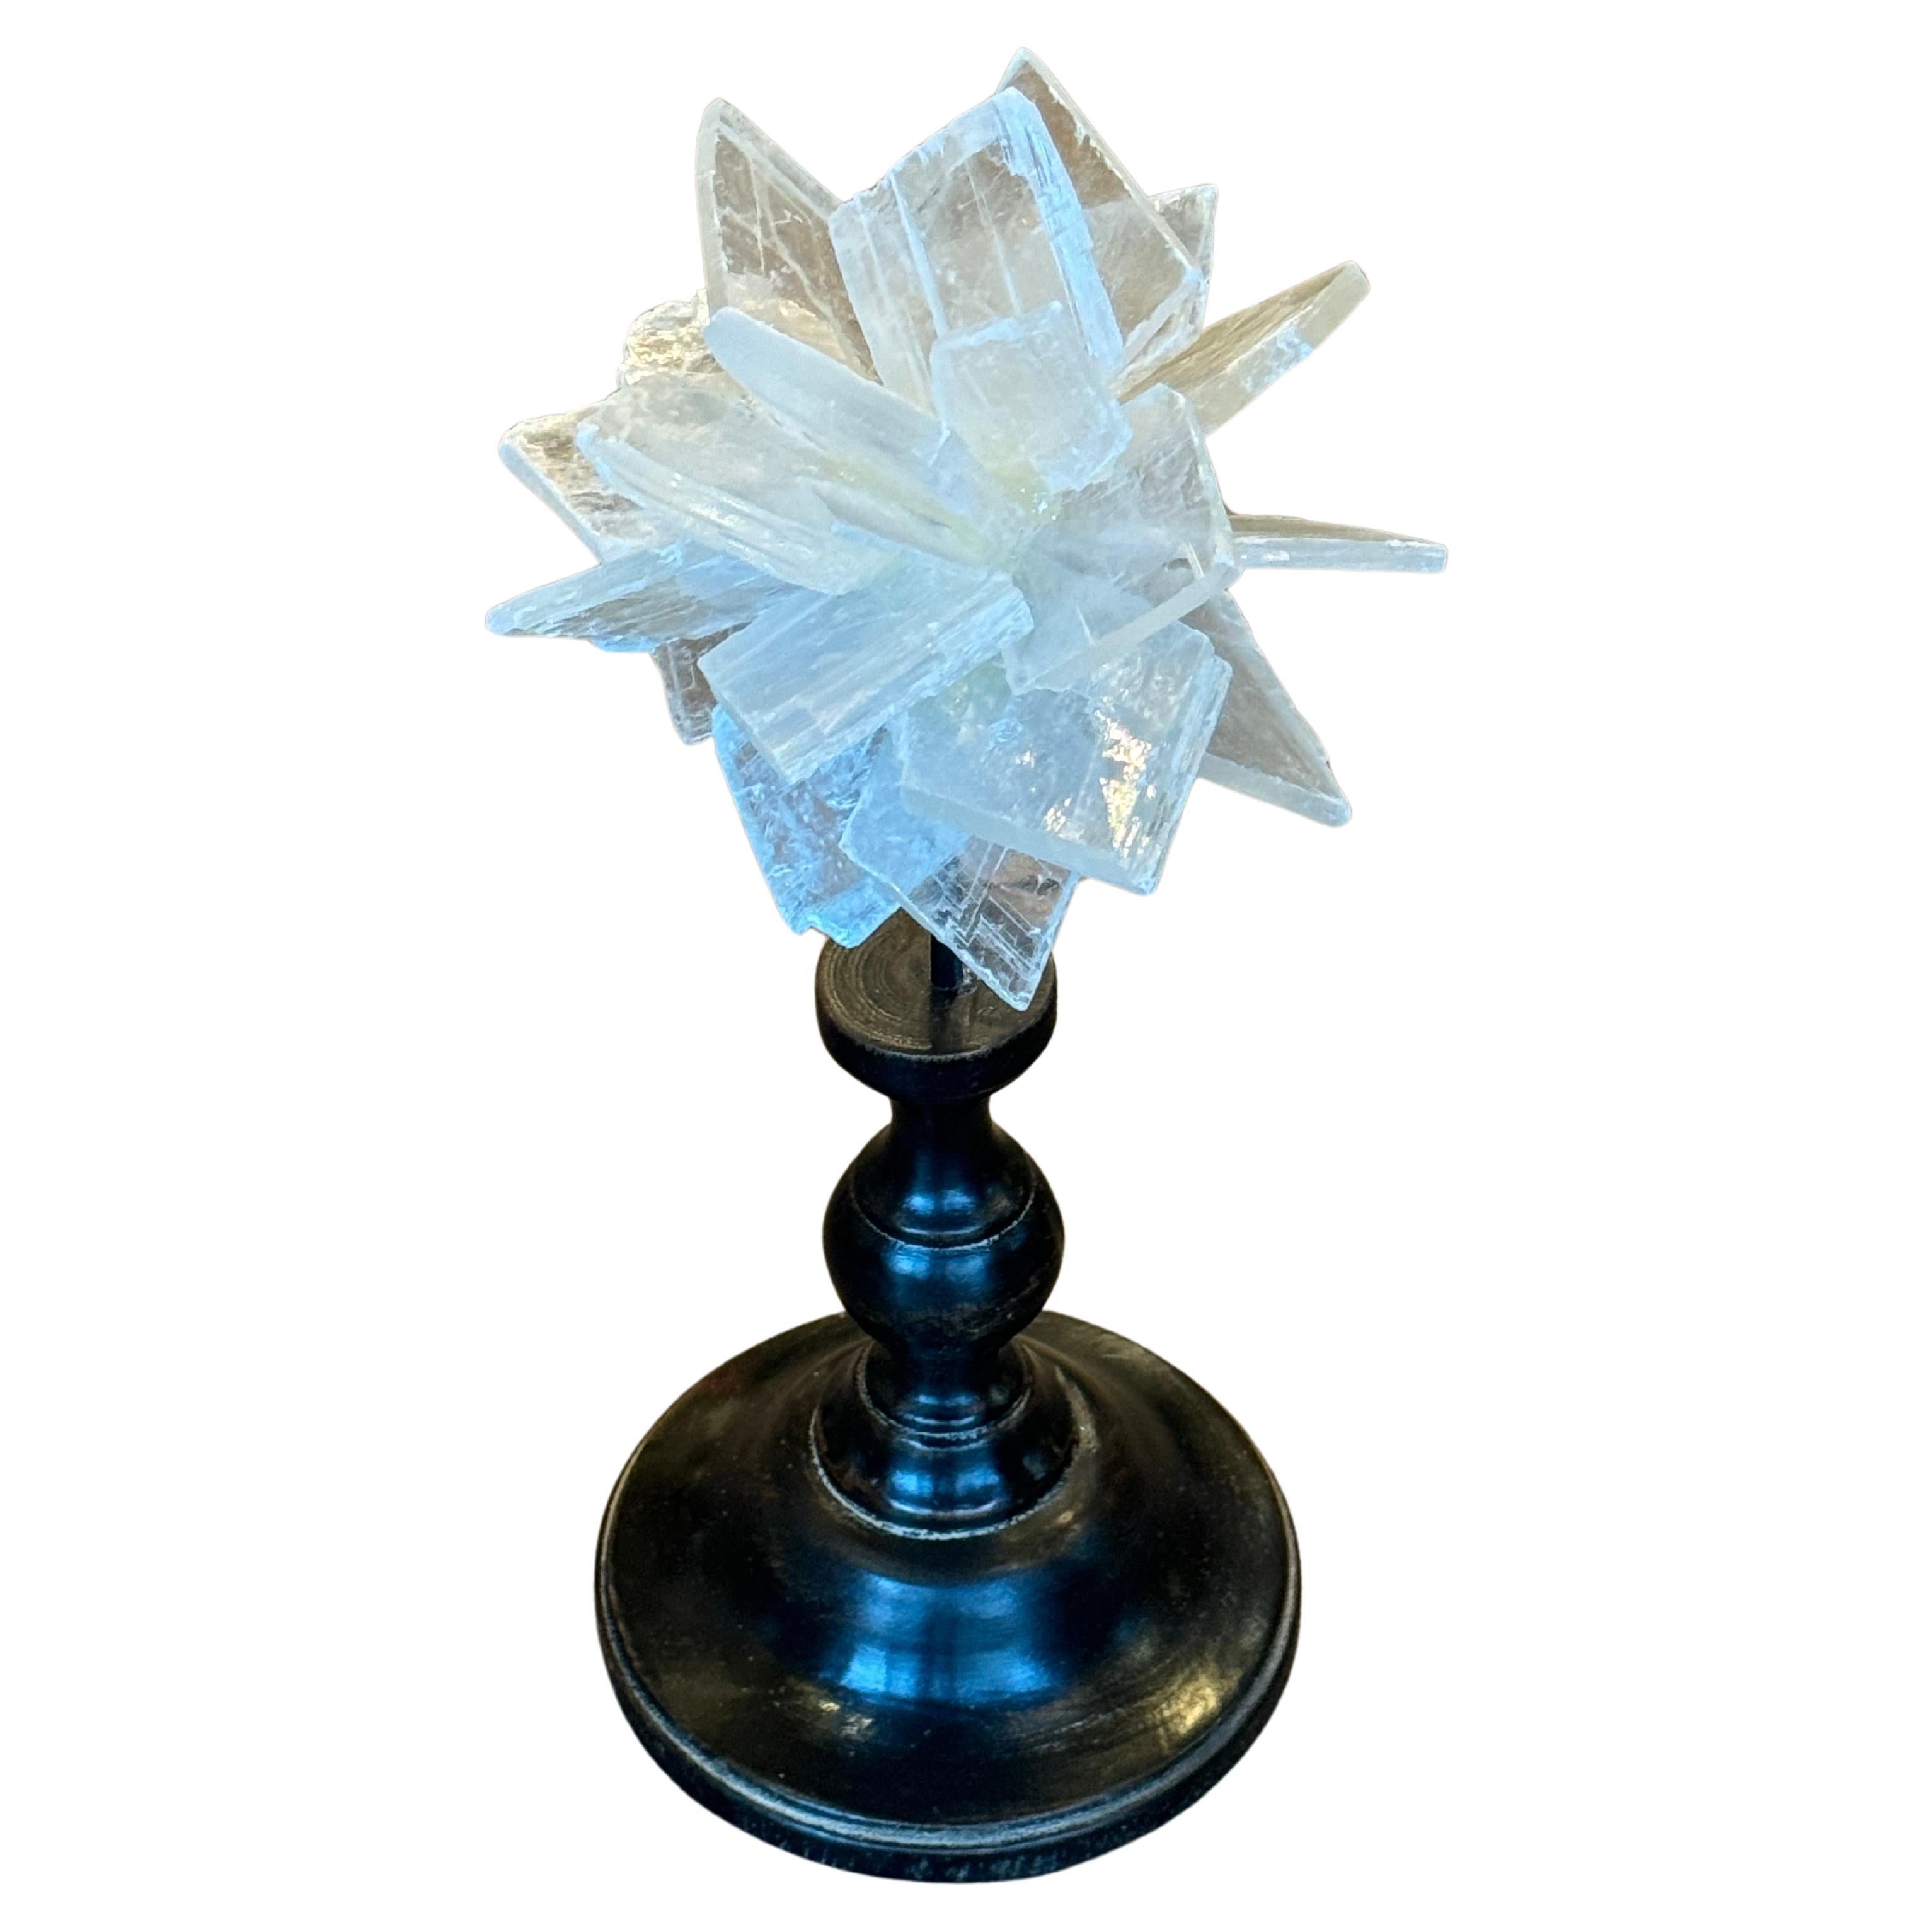 Hollywood Regency Parisian Cut-Glass Mounted Sculpture For Sale